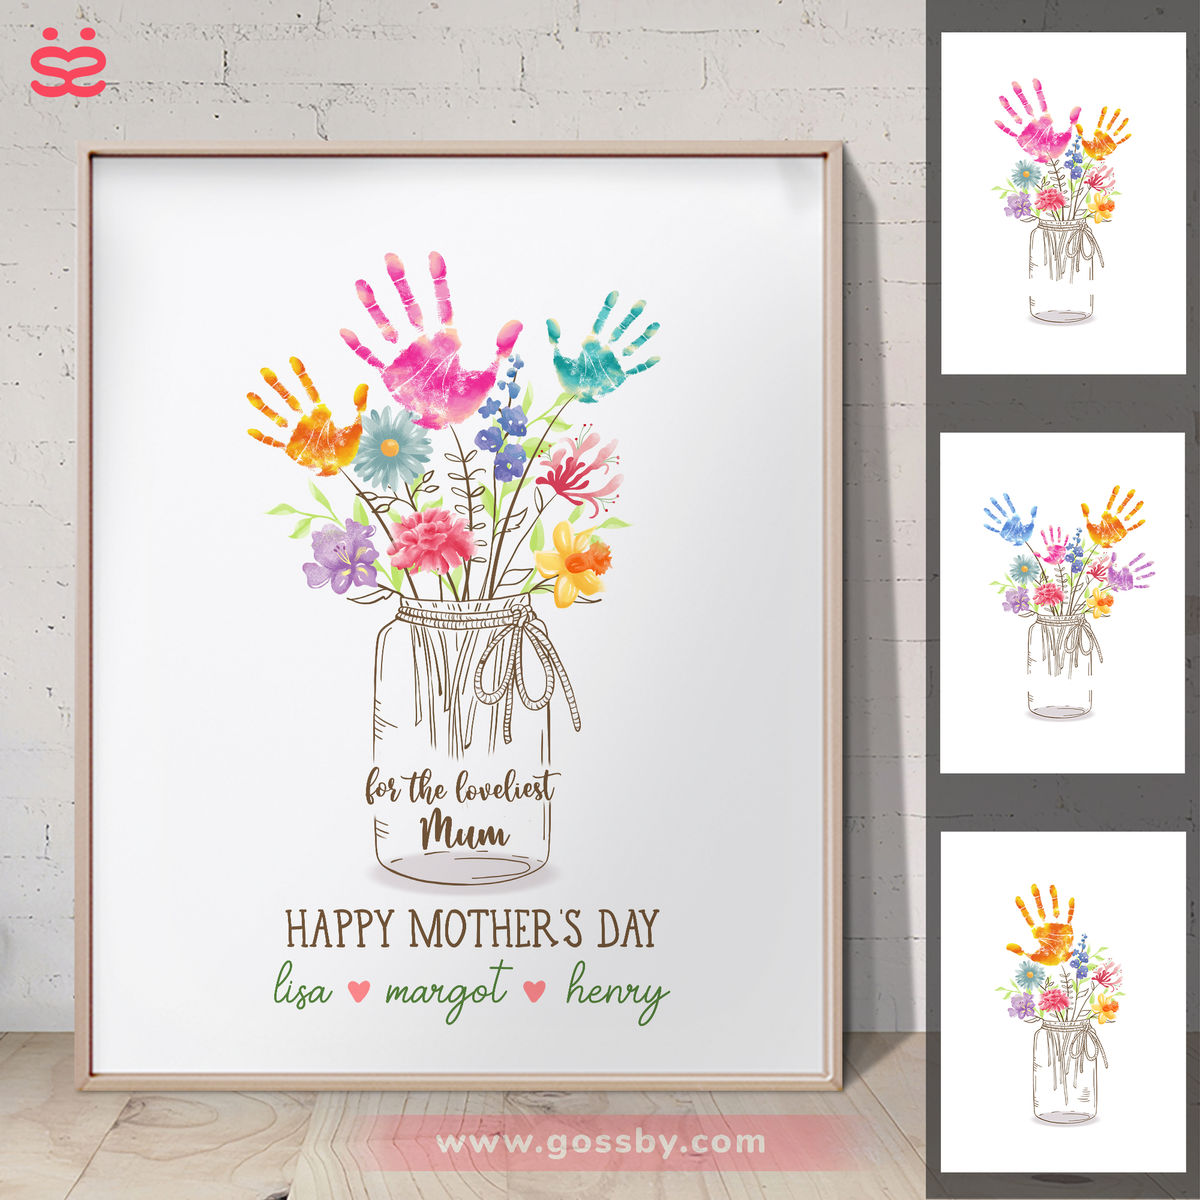 Personalized Poster - Love Poster - For the loveliest mom - Happy mother's day_1